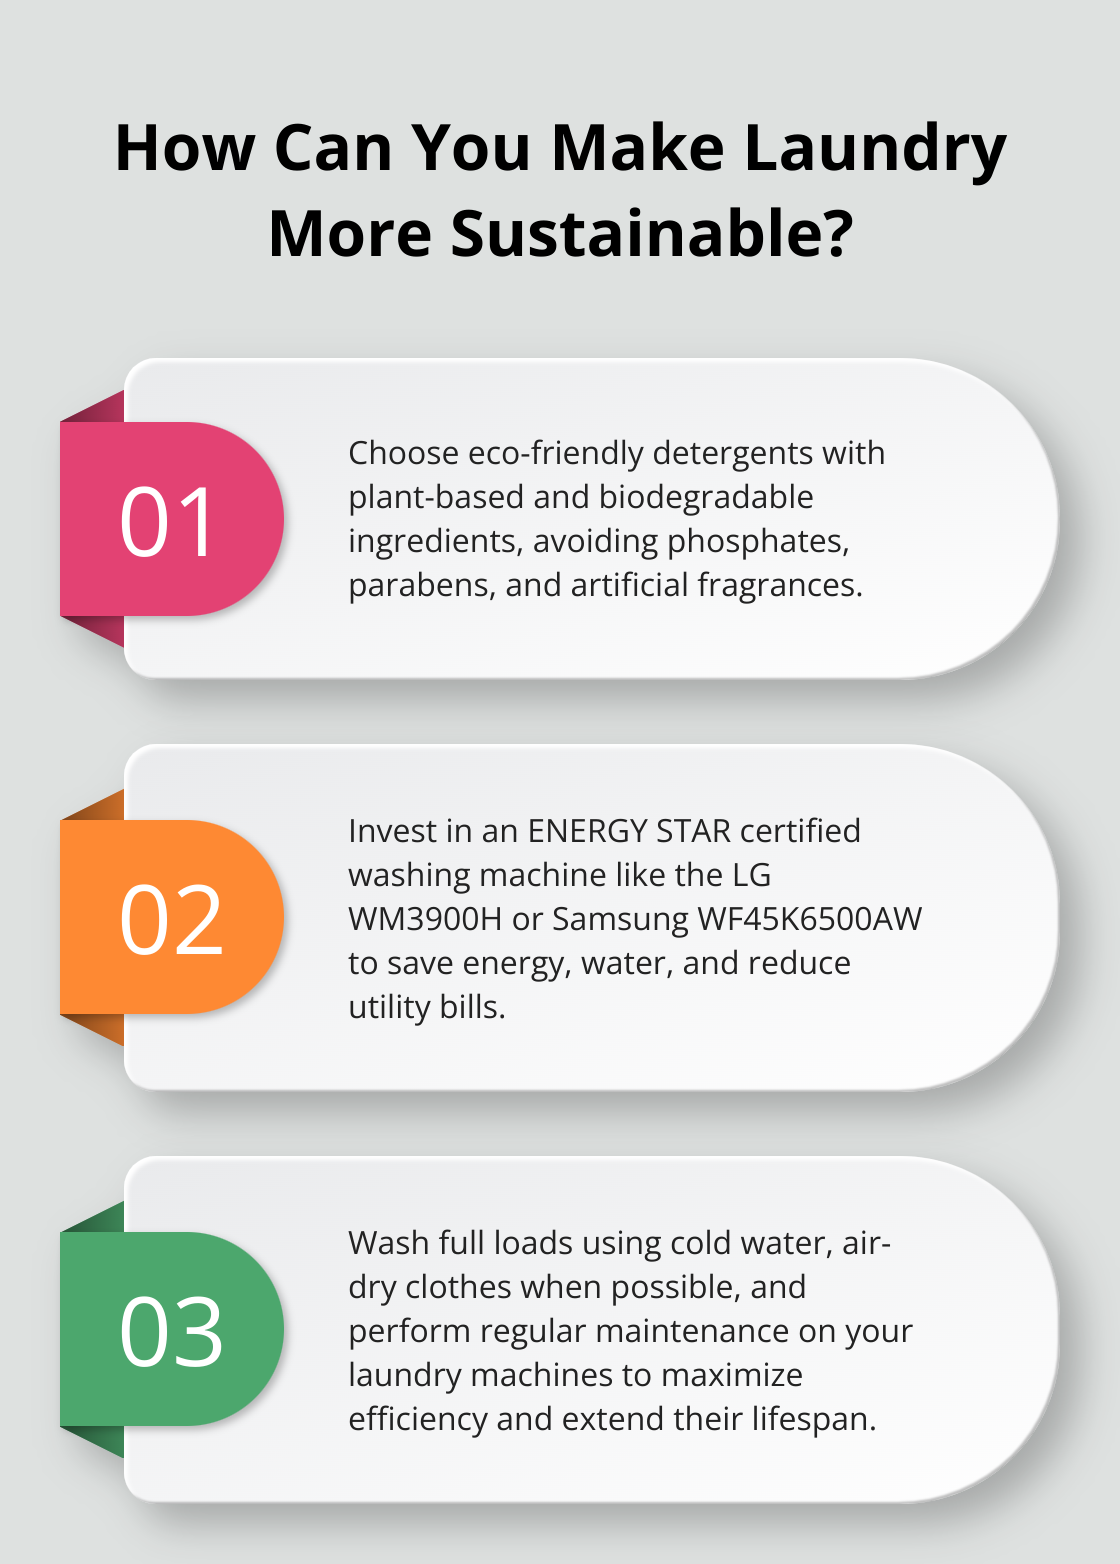 Fact - How Can You Make Laundry More Sustainable?